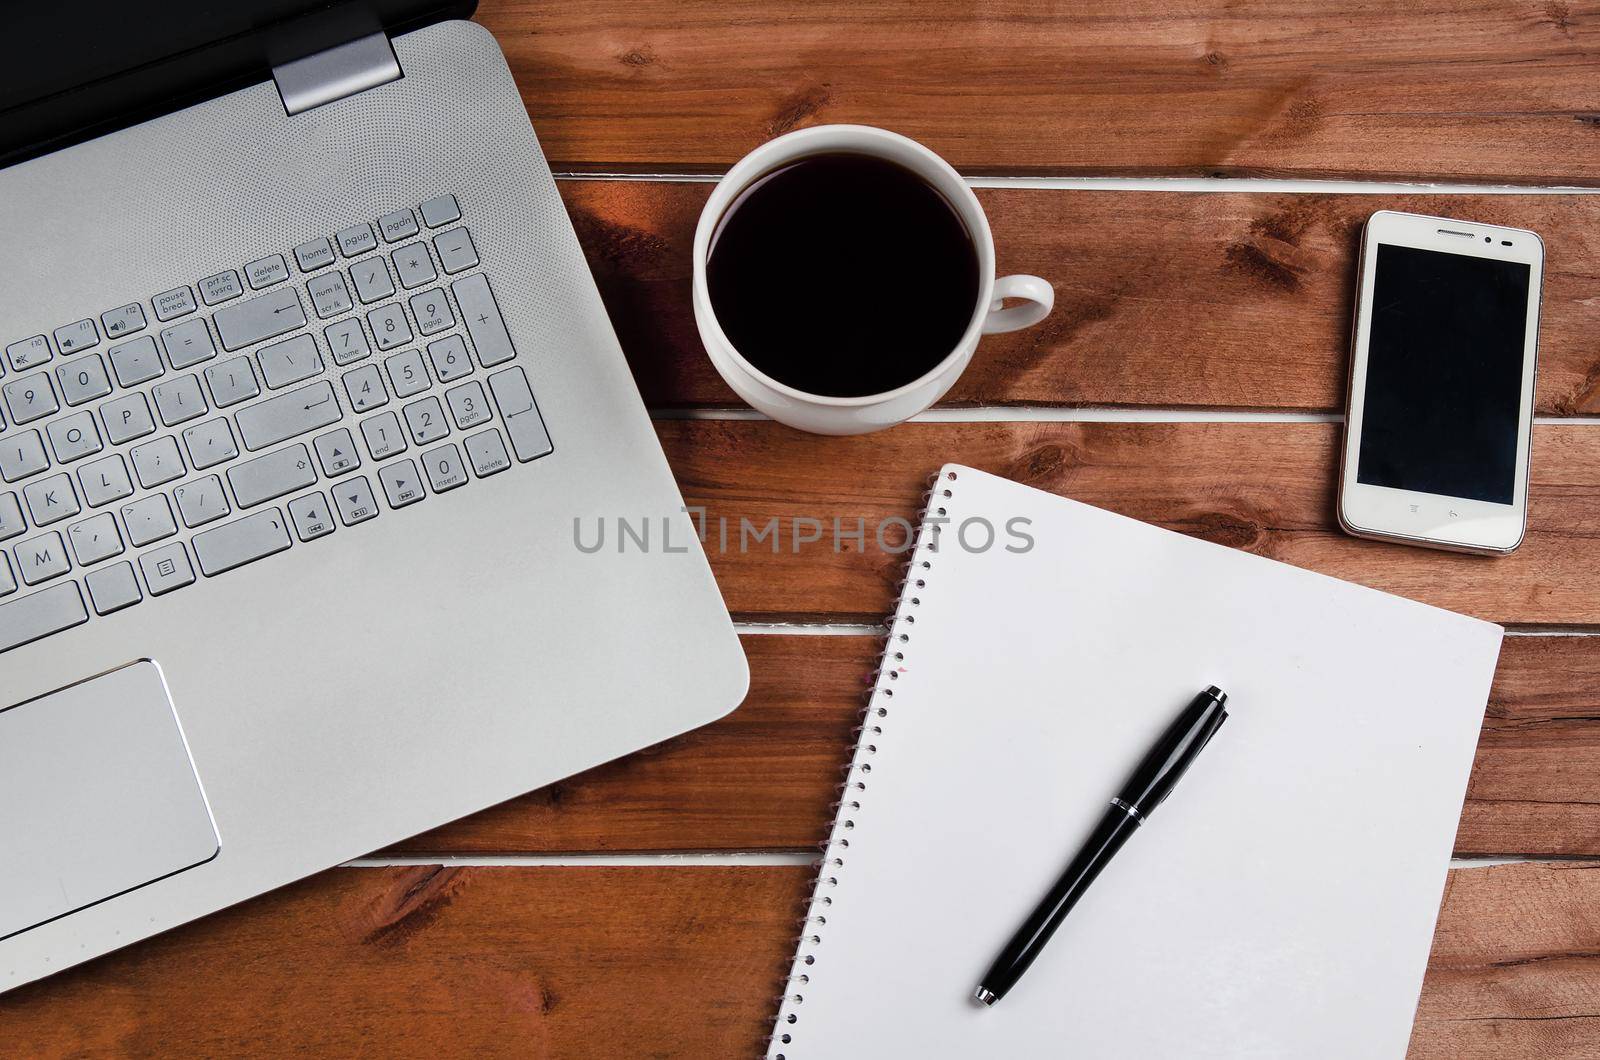 Cup of coffee and laptop on wooden table. Stock image.